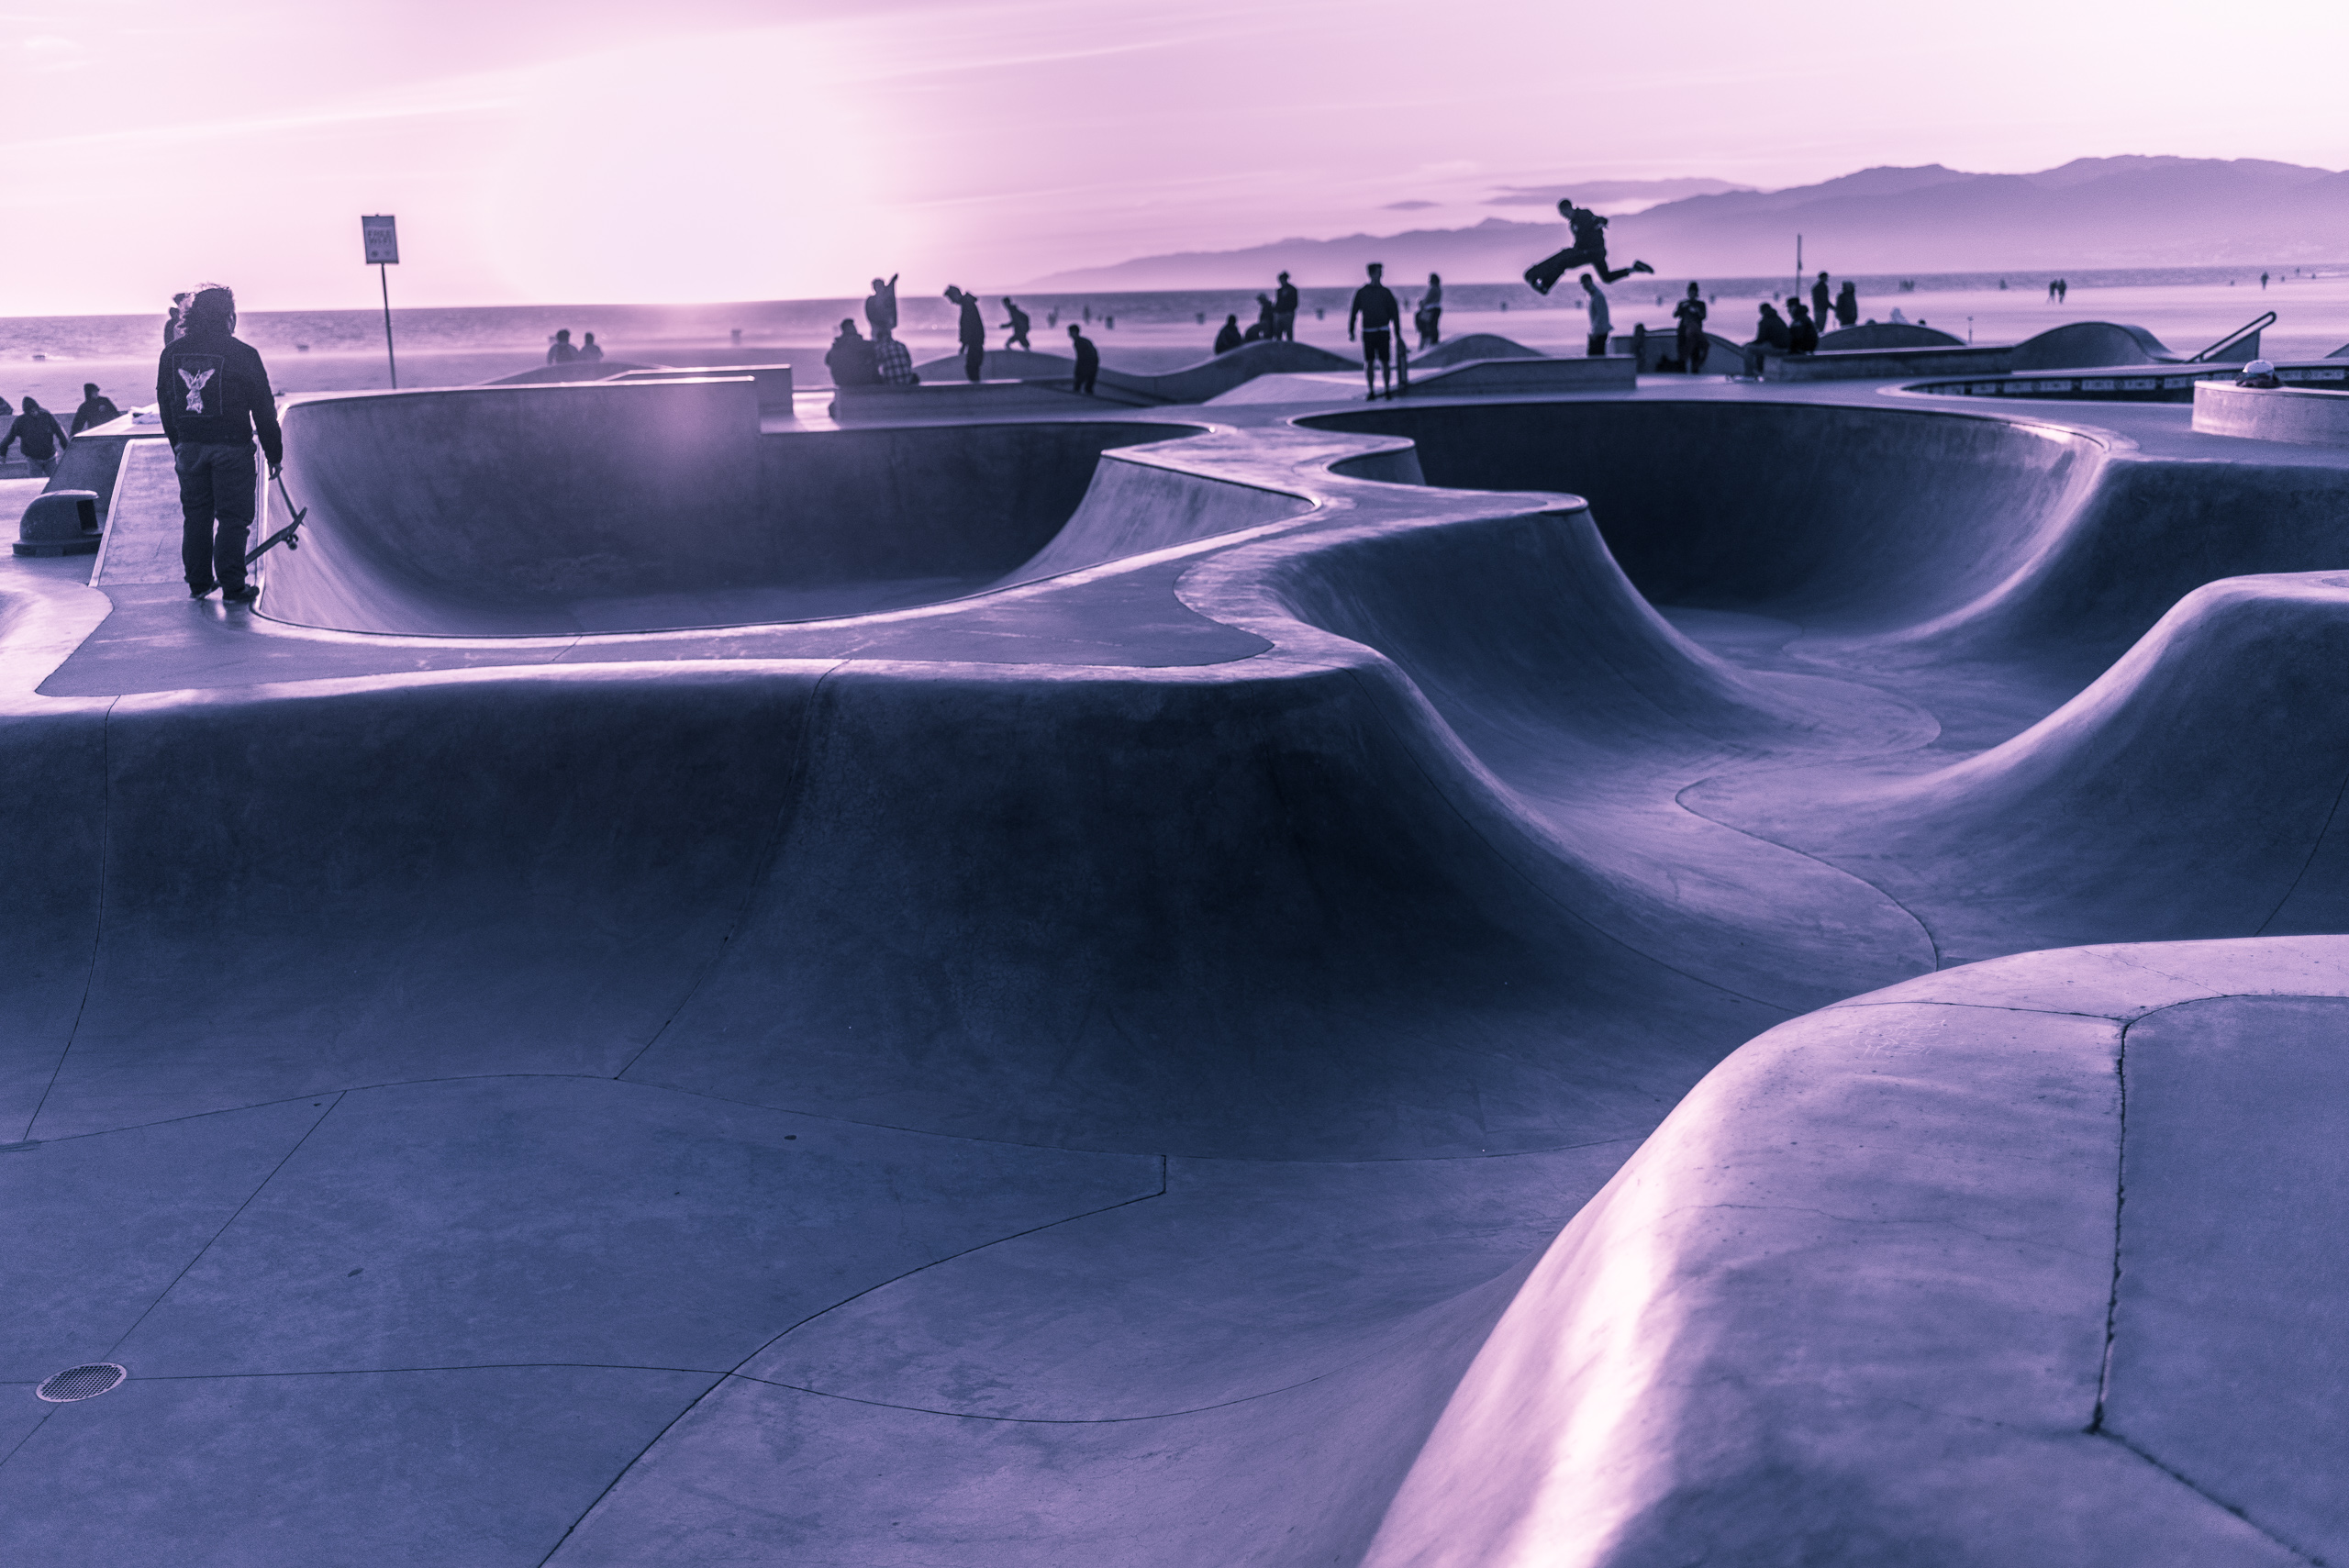 Photo at dusk looking across the many areas of the Venice Beach Skate Park. Skaters stand and skate at different points, with one skater high in the air above the pool.